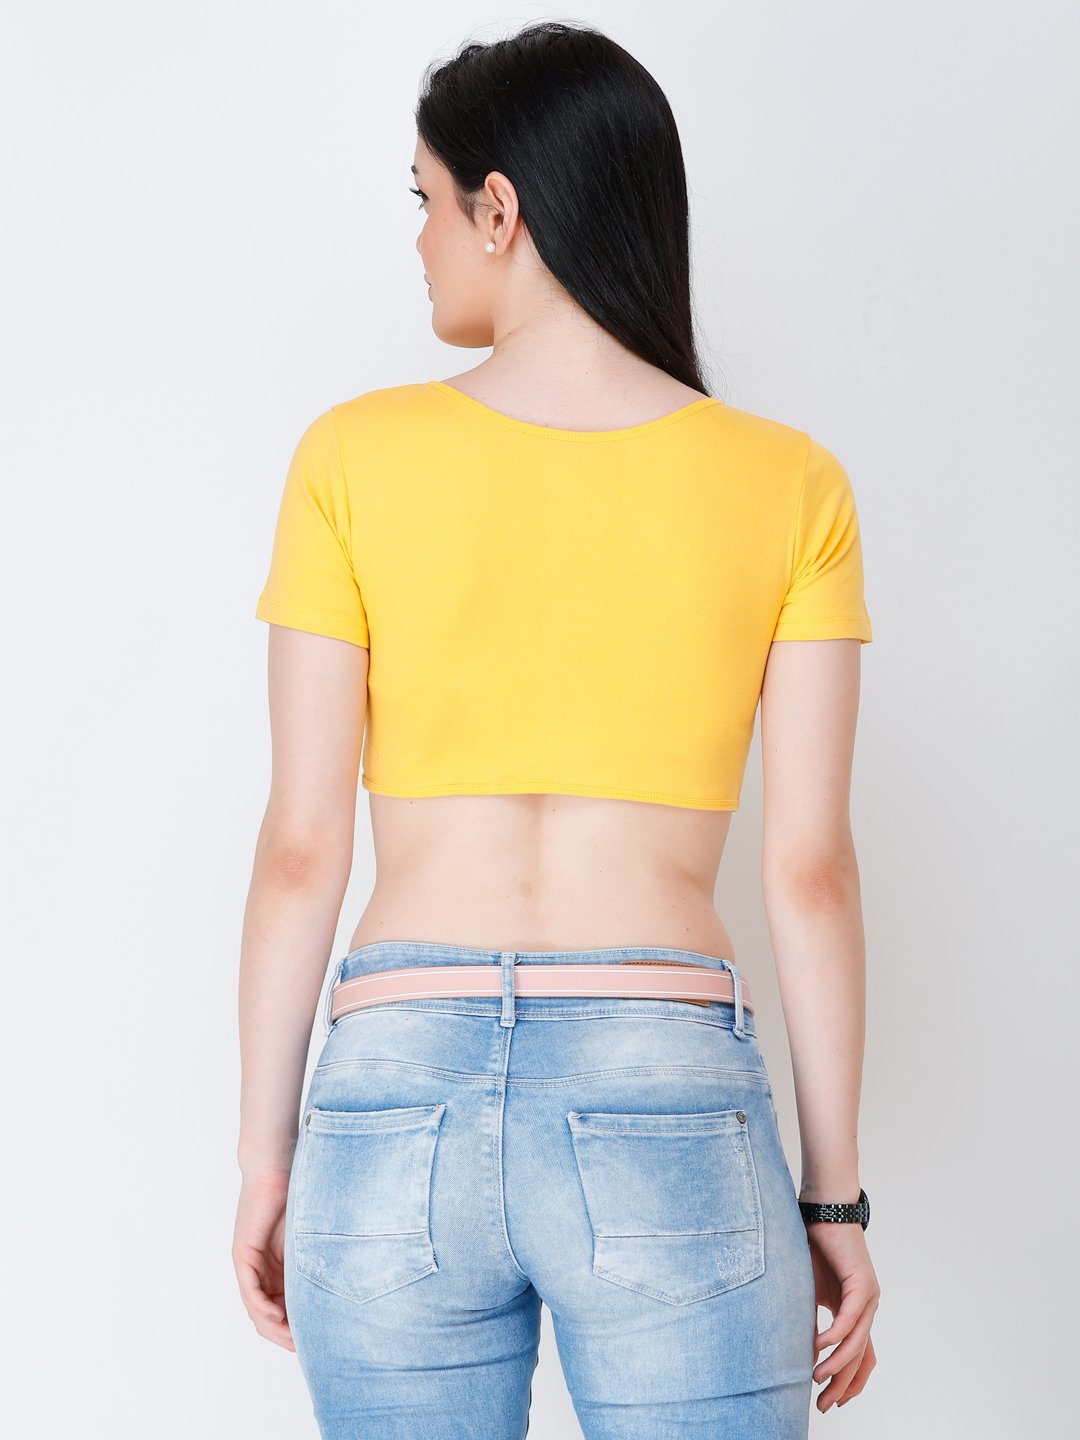 SCORPIUS yellow knotted crop top